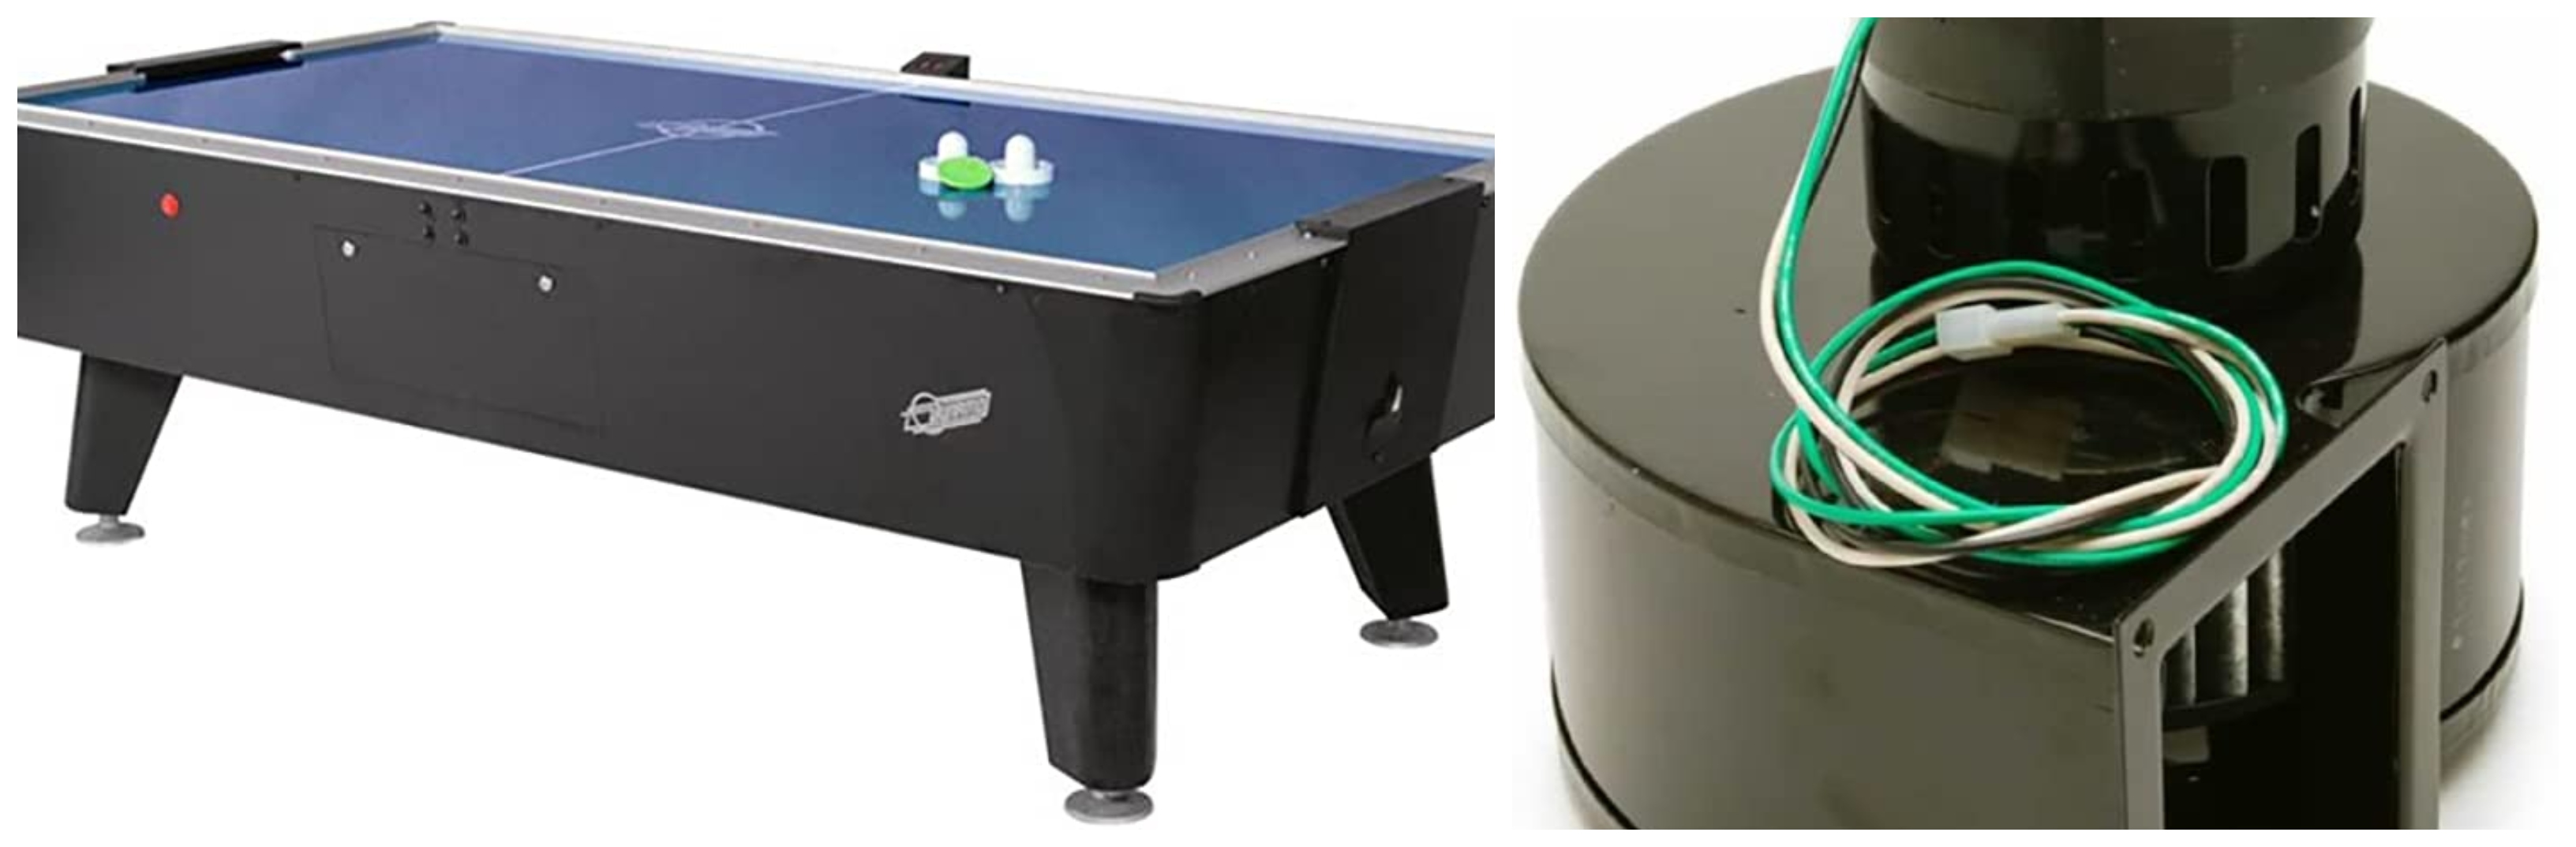 Valley-Dynamo ProStyle Air Hockey table; Valley-Dynamo ProStyle Air Hockey Blower motor